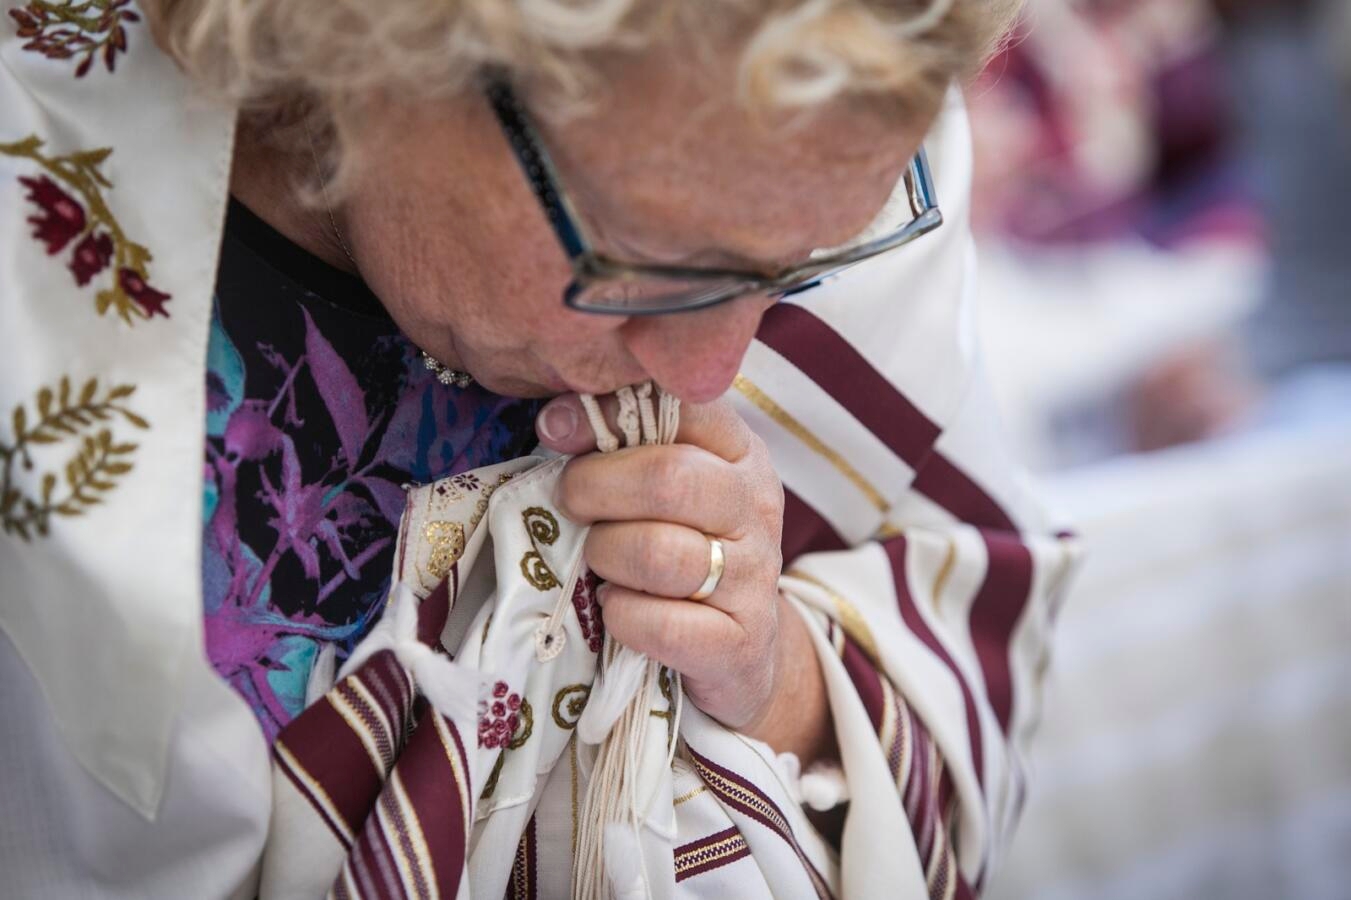 Photo of a woman wearing a tallit and kissing the fringes.